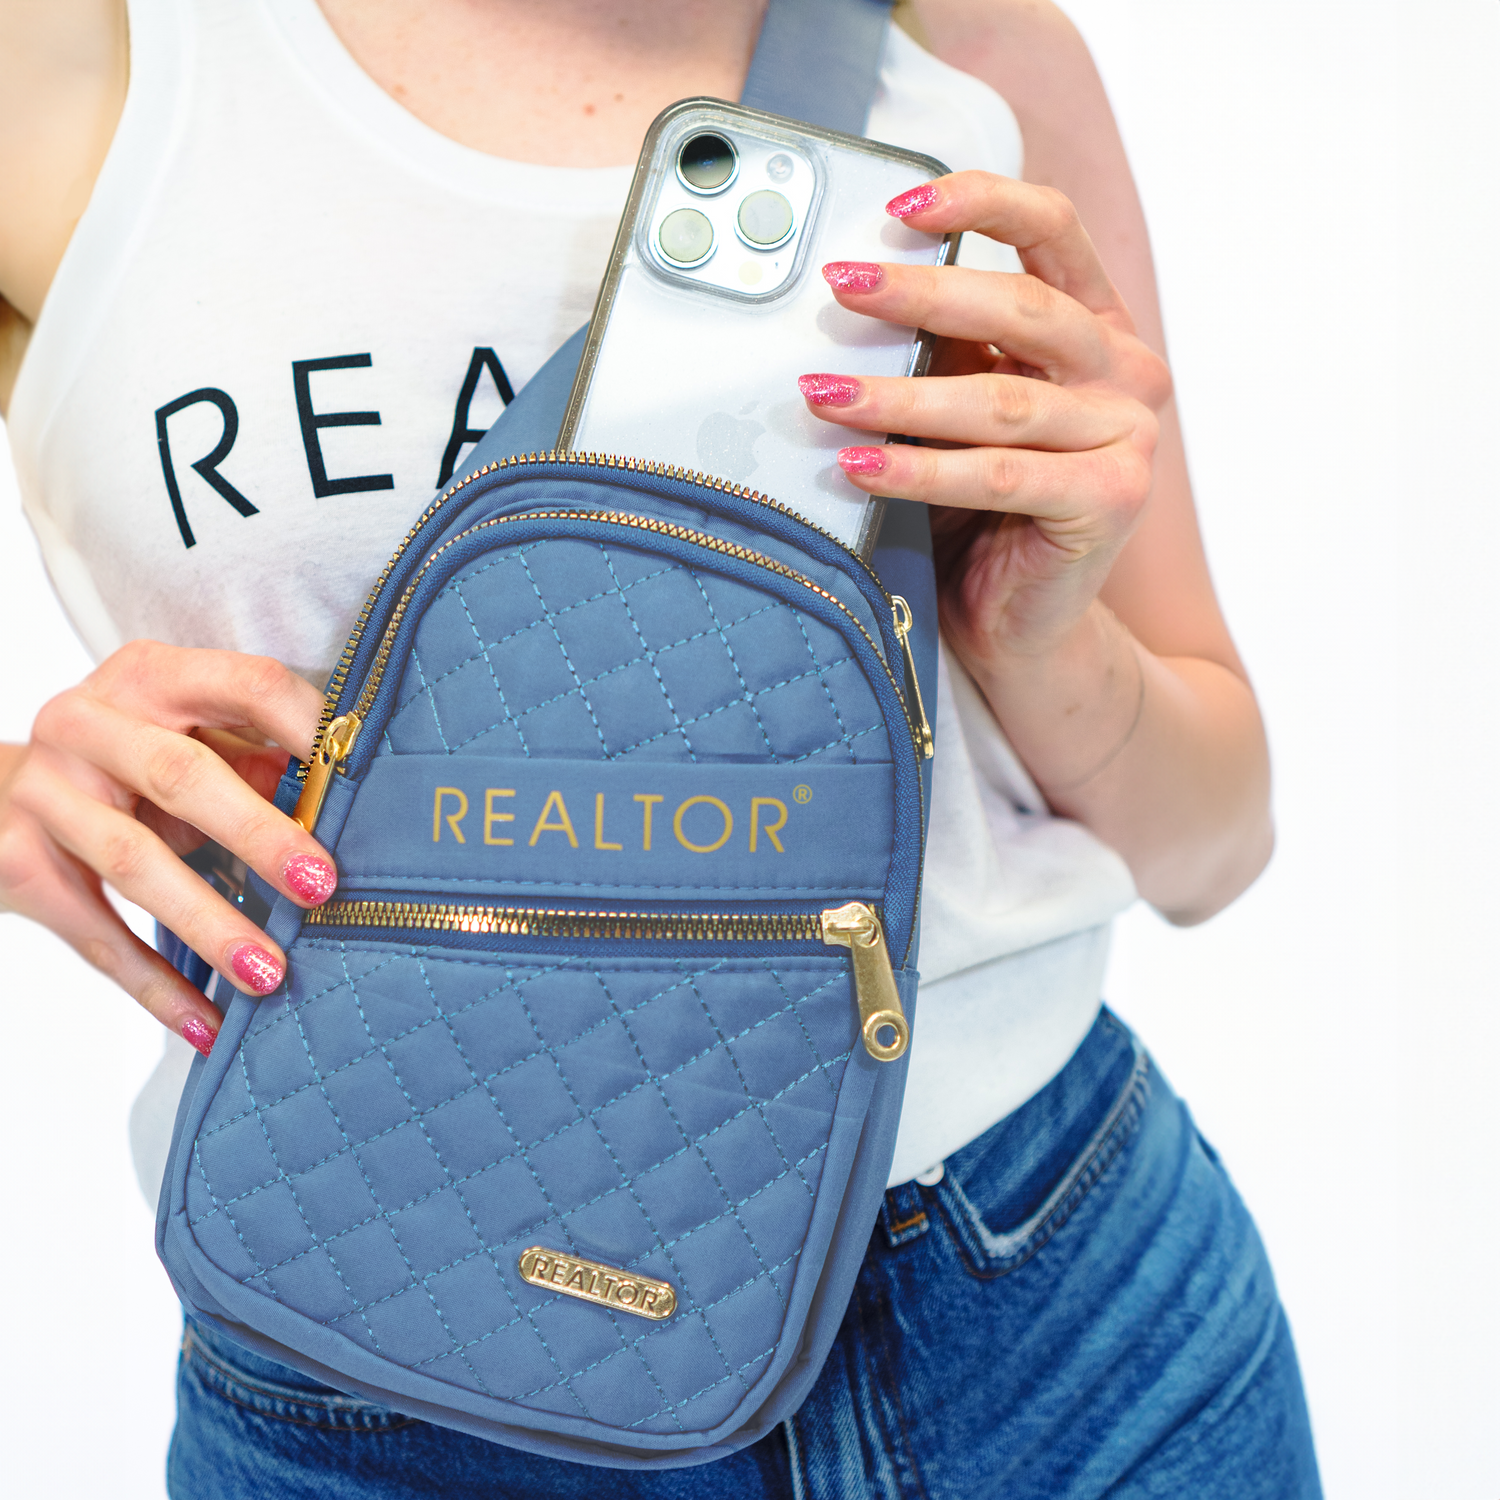 Blue REALTOR® Sling Bag modeled by a woman.